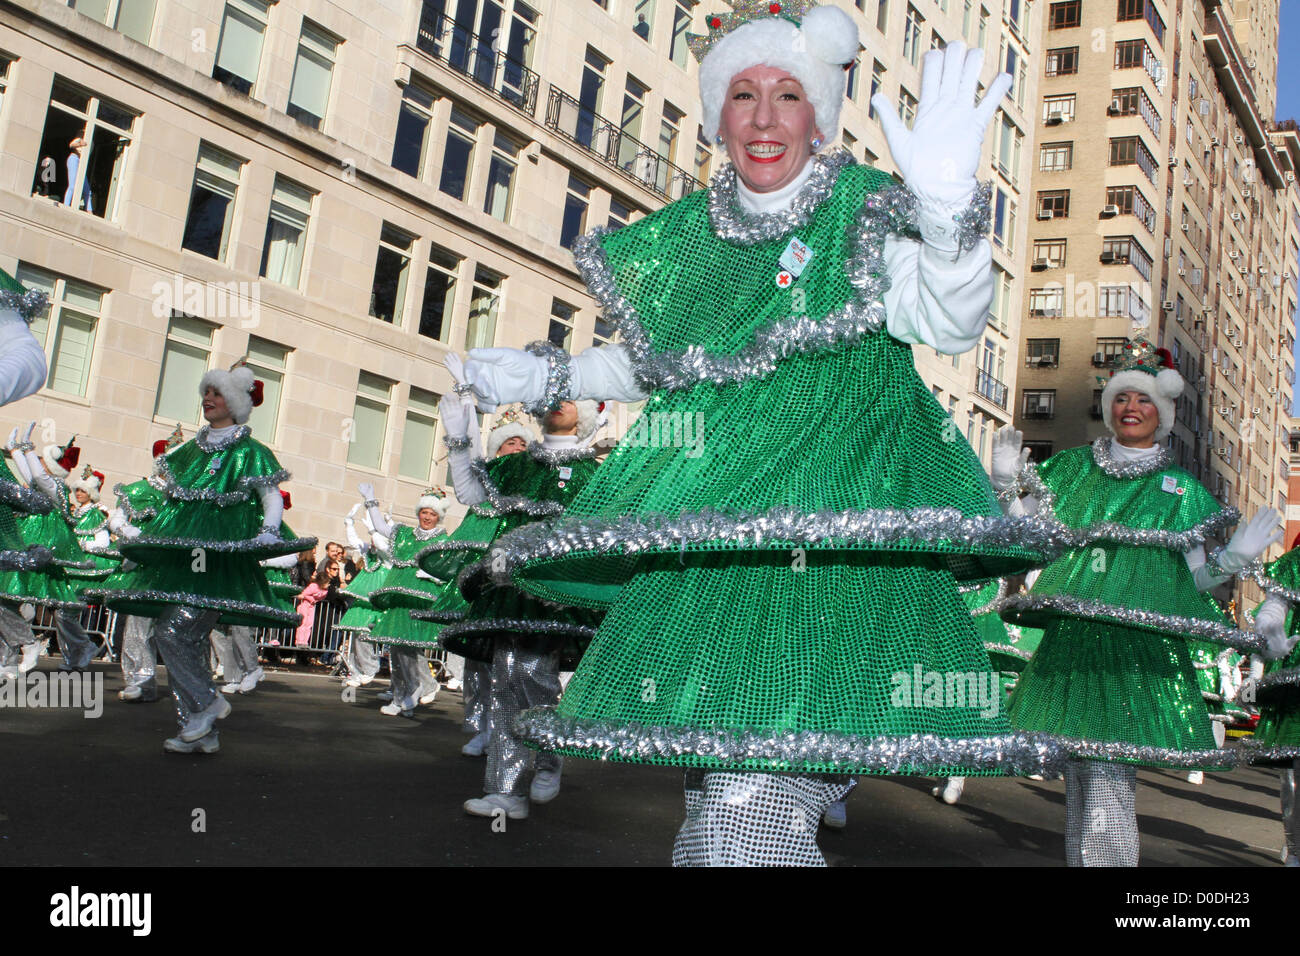 Dancing Christmas trees dance down Central Park West during Macy's Thanksgiving Day Parade in New York City, on Thursday, Nov. 22, 2012. Stock Photo